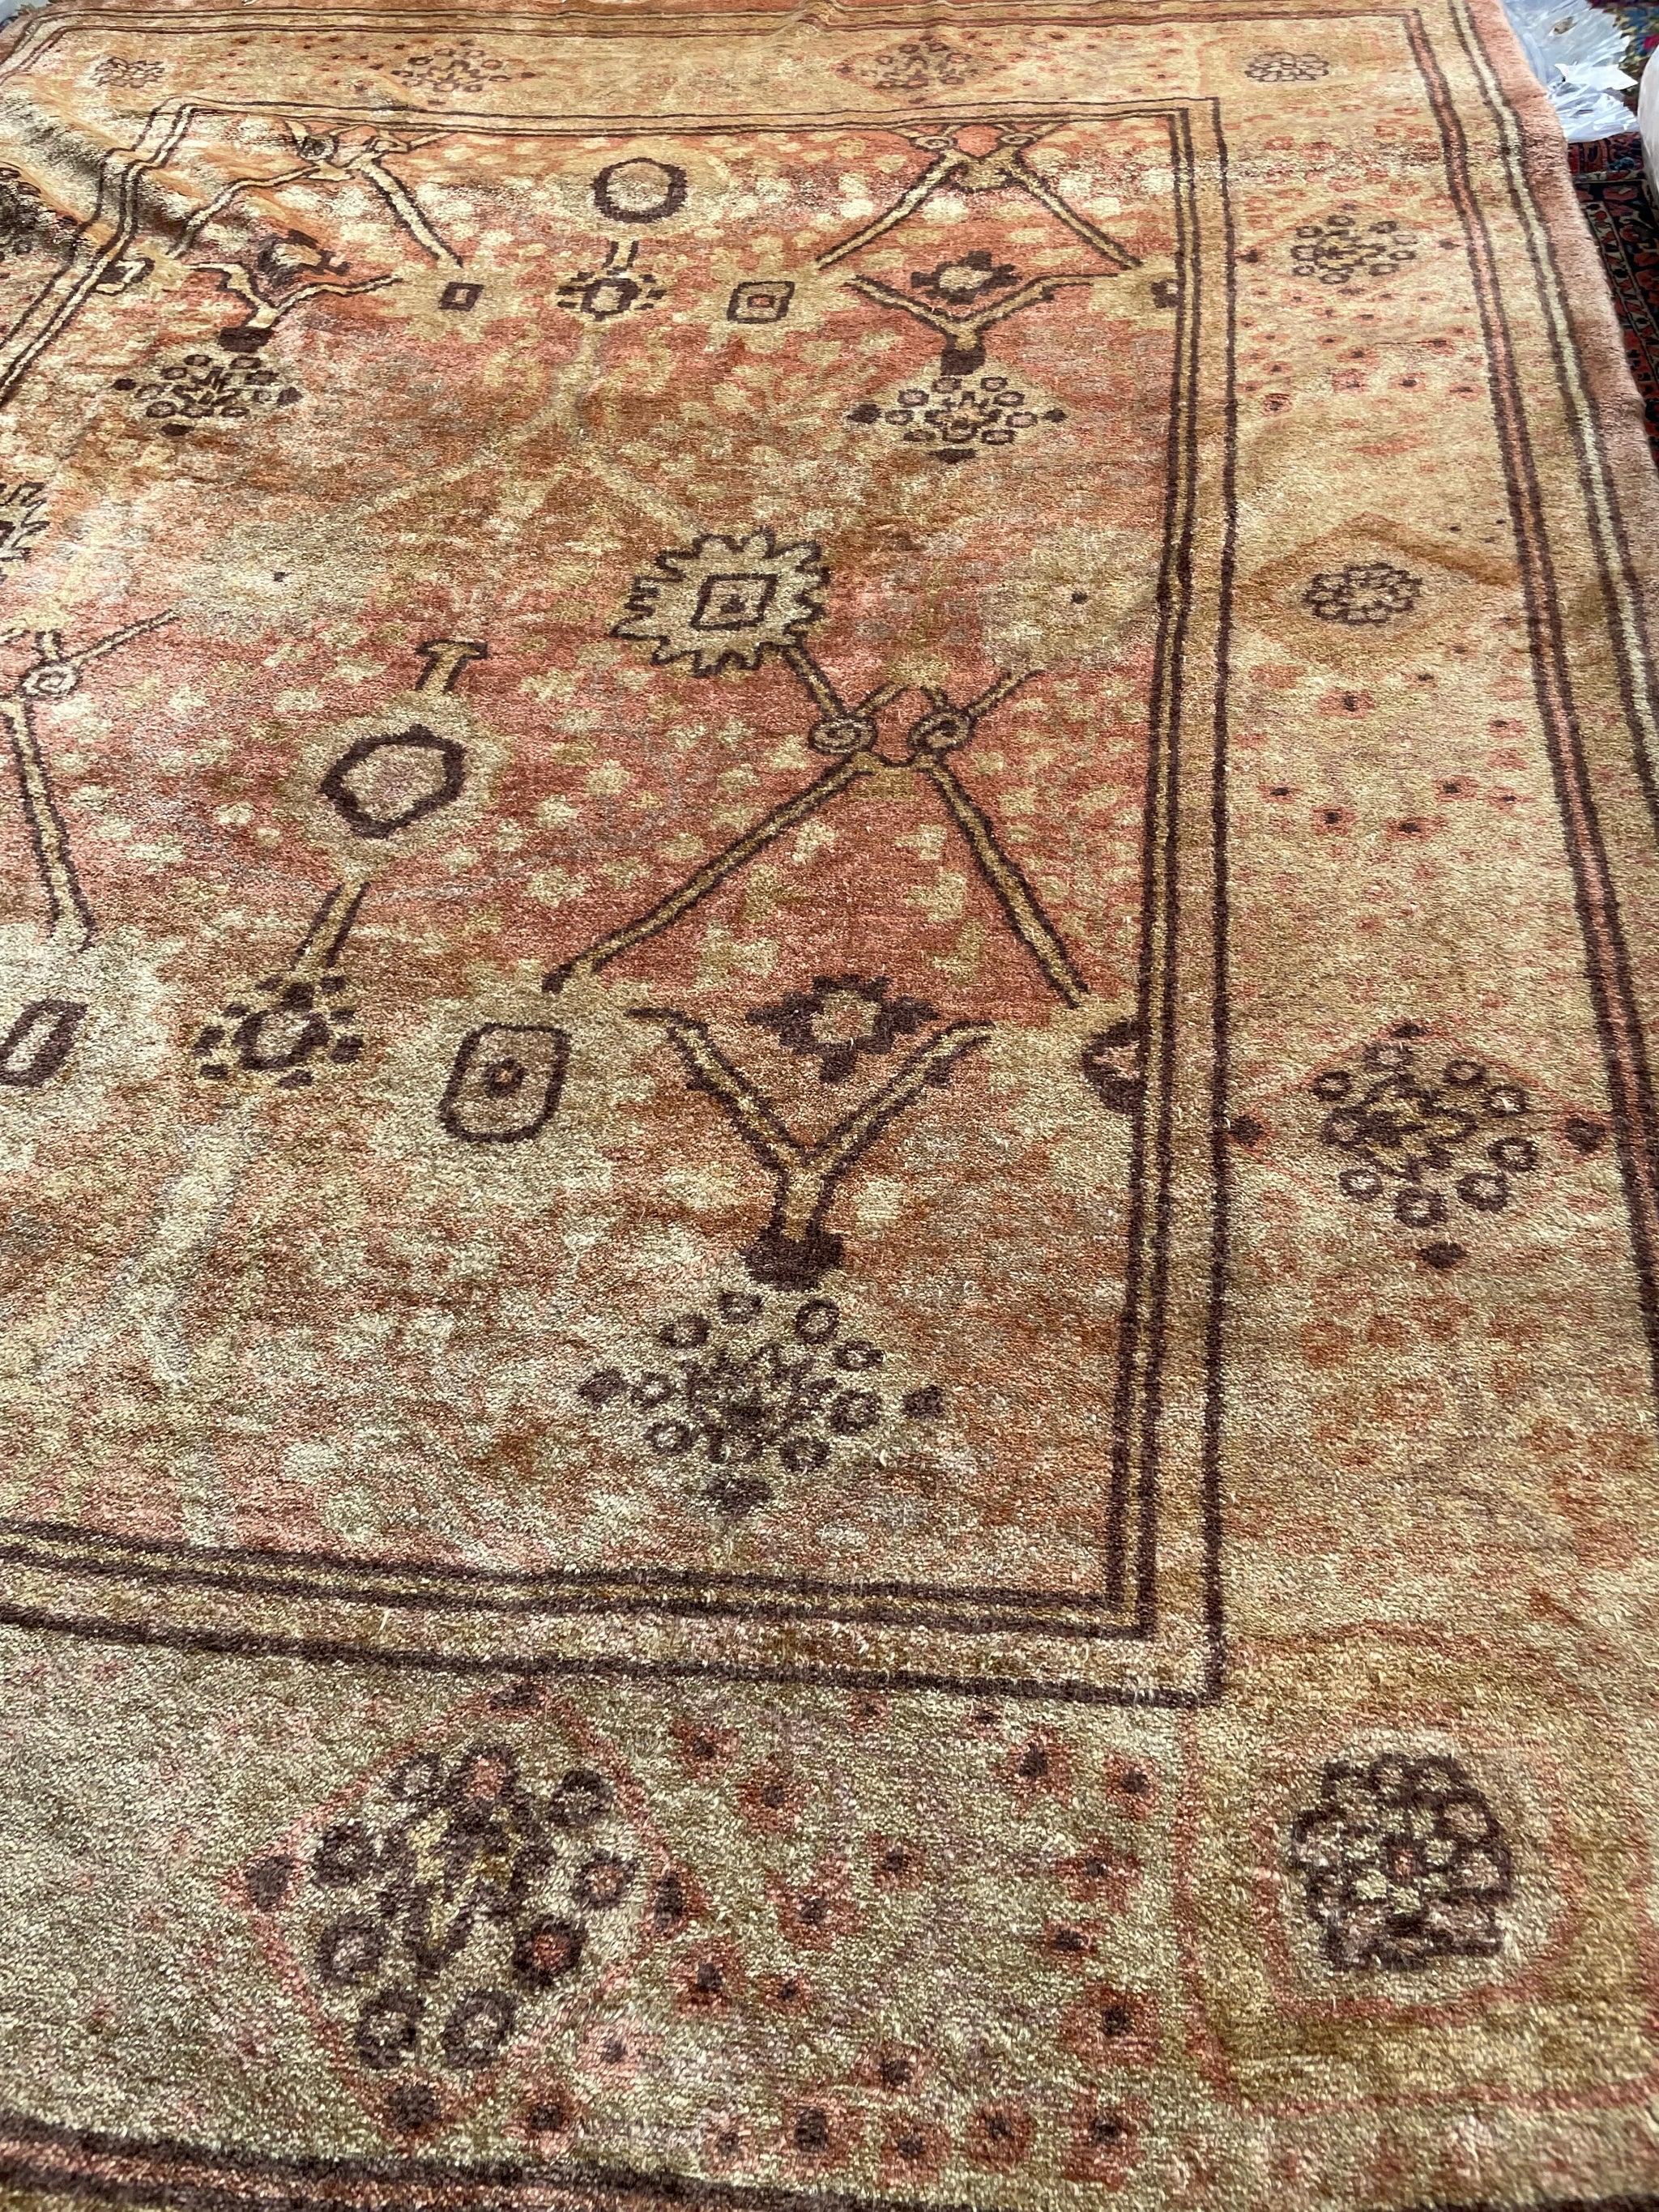 Hand-Knotted Ancient Glowing Vintage Oushak Rug with Glossy Plush Wool, circa 1950-60's For Sale